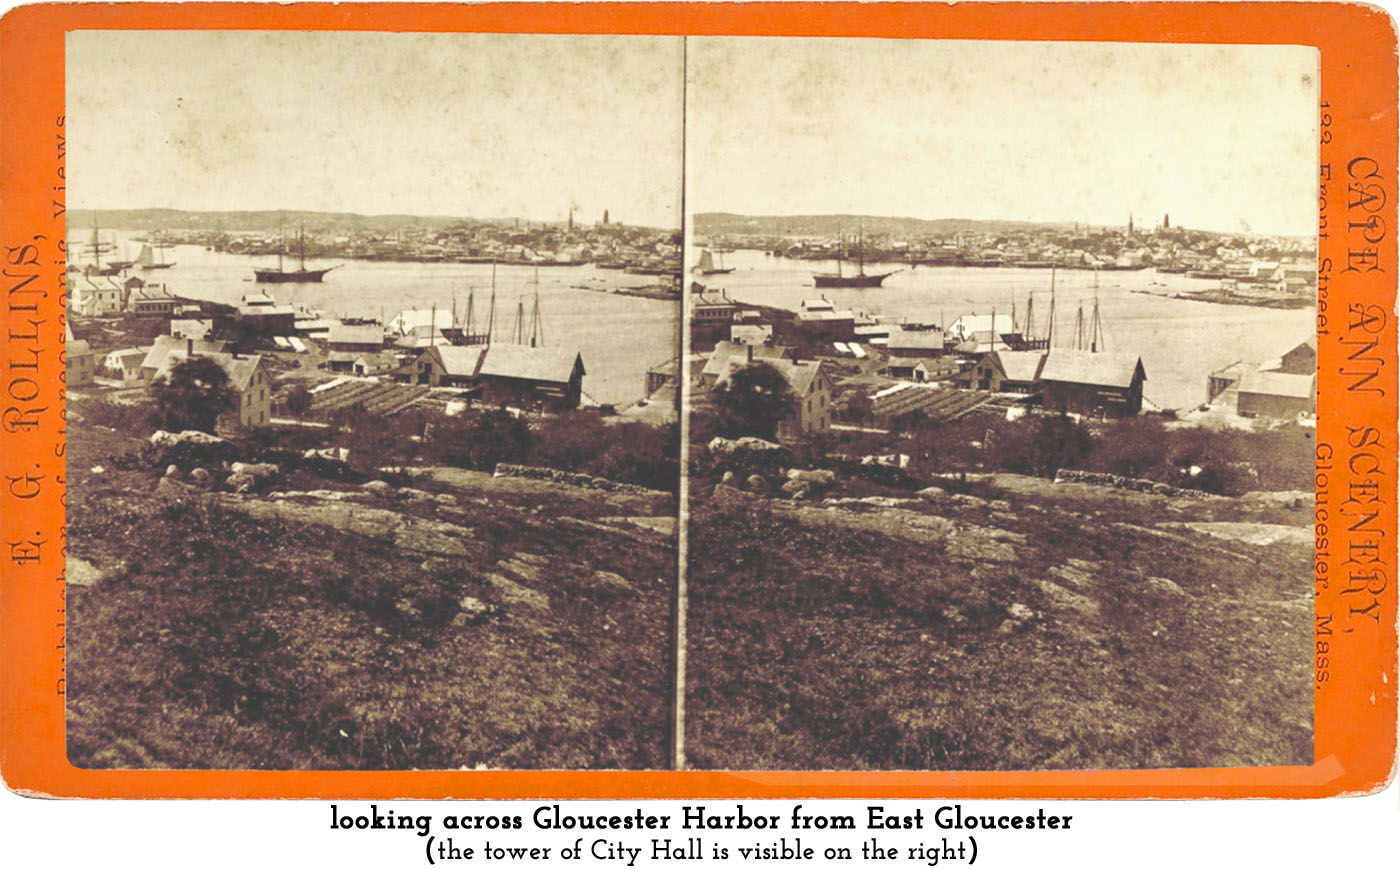 view across harbor from East Gloucester